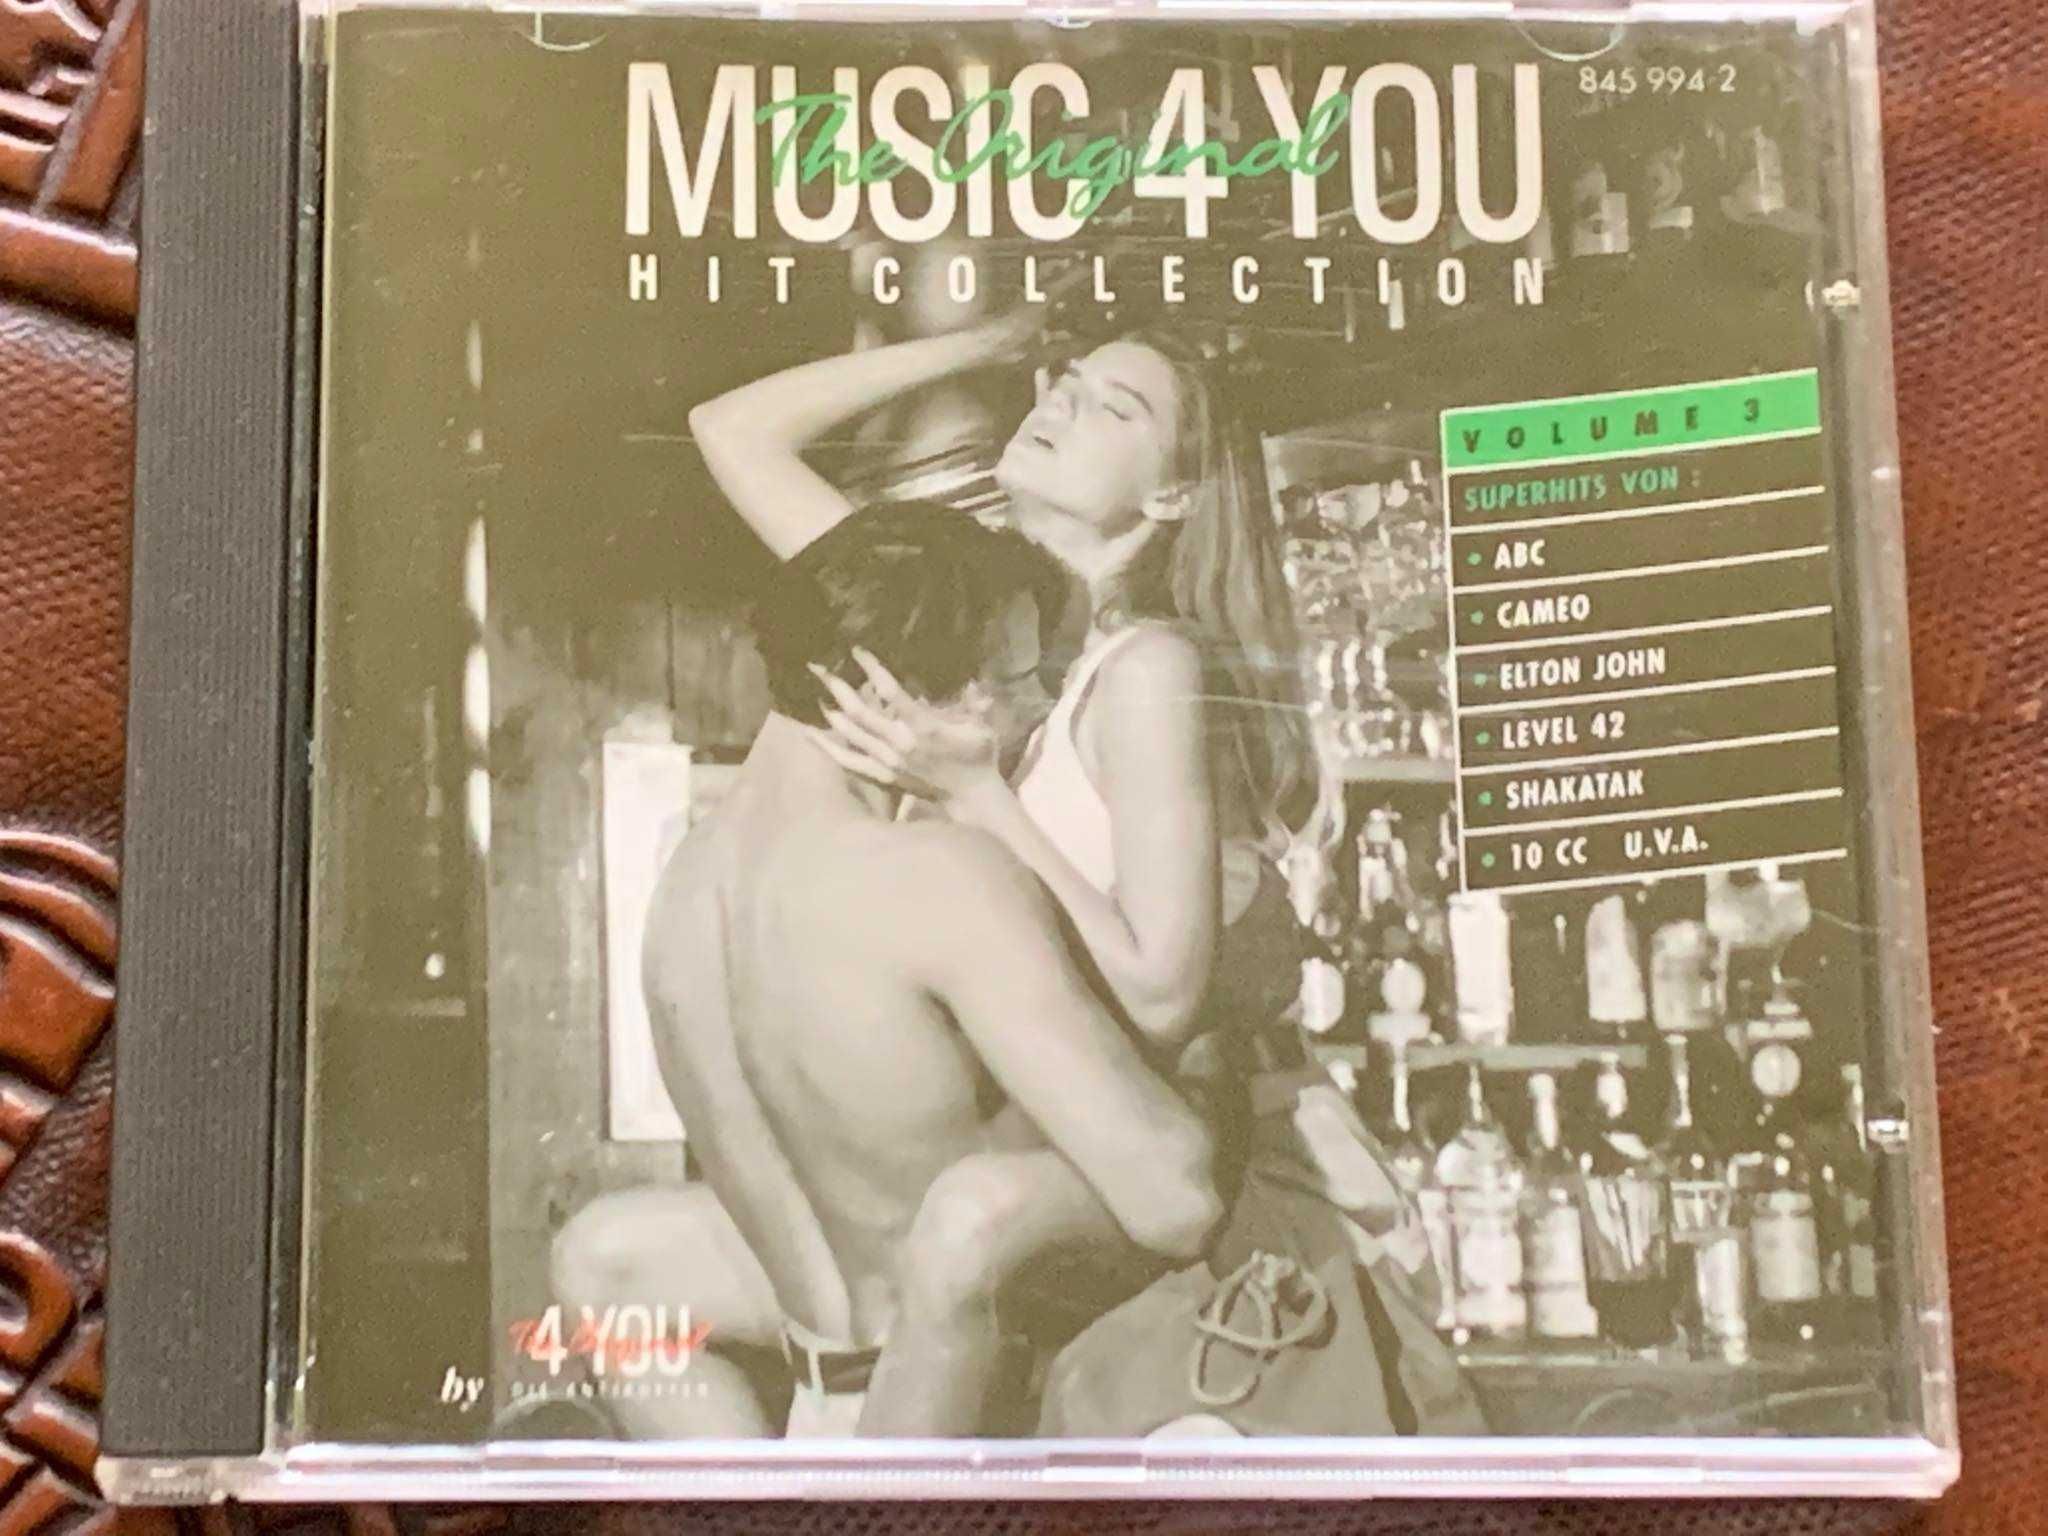 Music 4 You - Hits Collection Vol.3 - CD - stan EX!